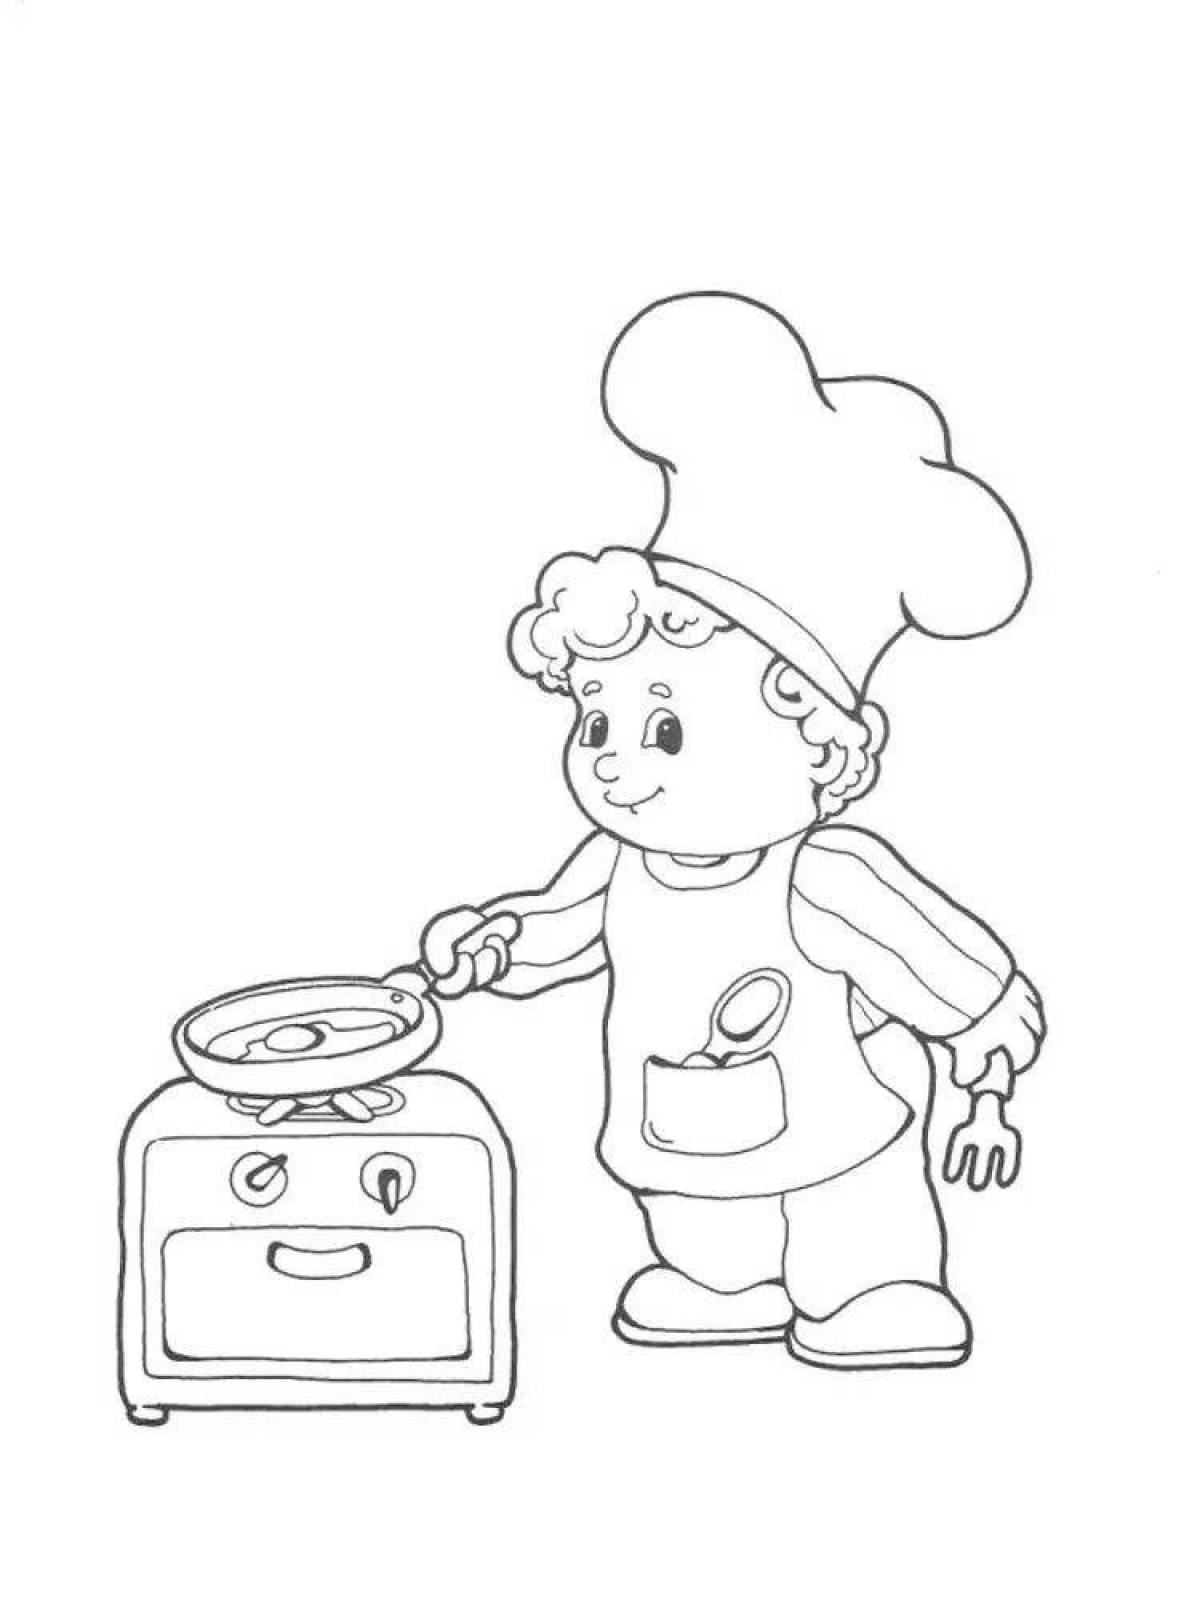 Color loving cook coloring page